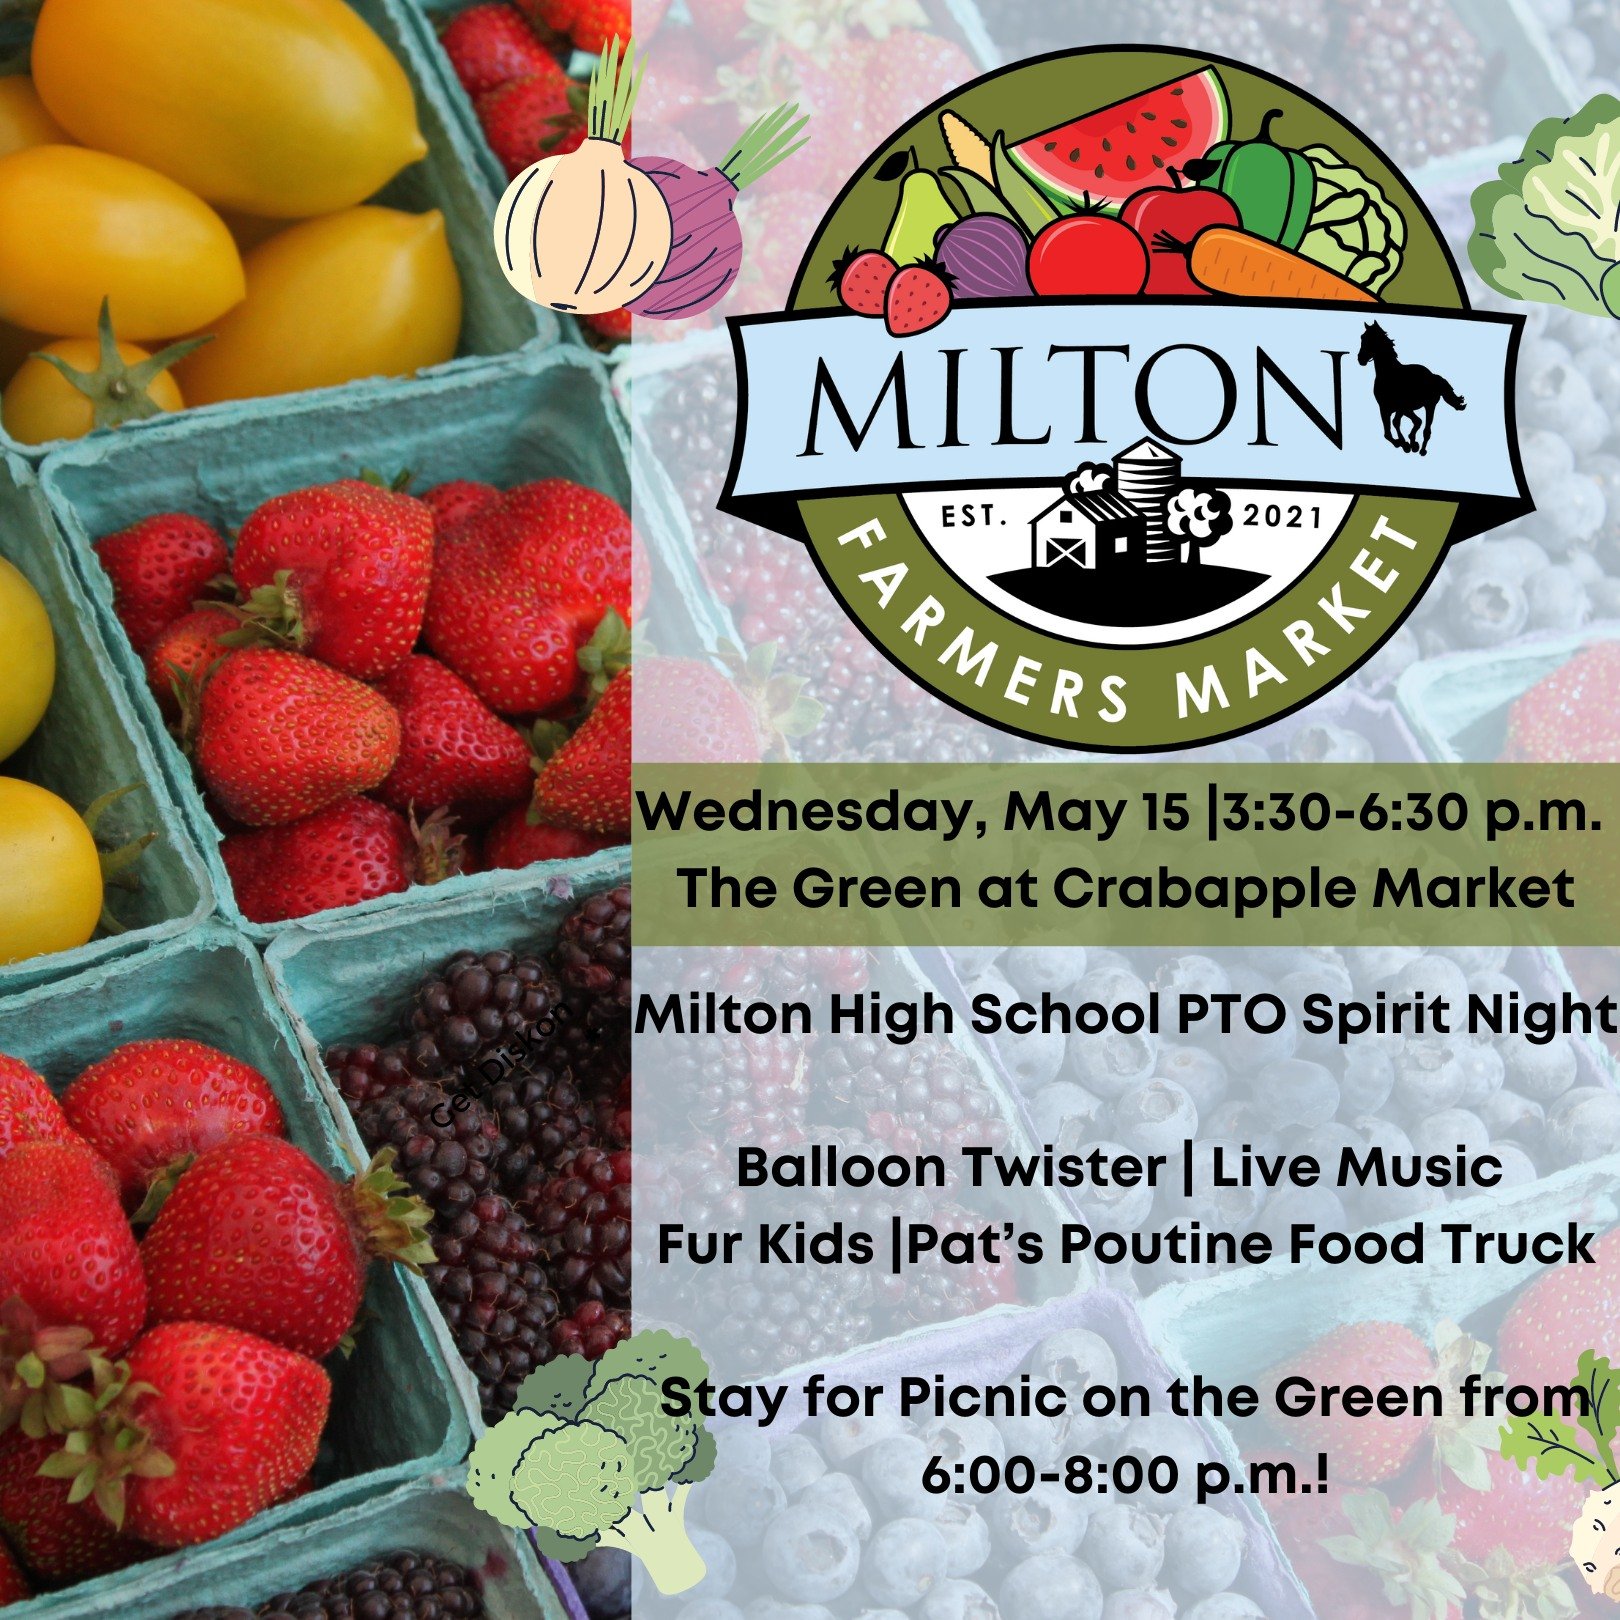 WEDNESDAY #TheGreen is the place to be with the Milton Farmers Market and Picnic on The Green with live music. New for this week is Pat's Poutine Food Truck and Milton High School PTO Spirit Night! 
Milton Farmers Market 3:30 - 6:30PM
Picnic on The G